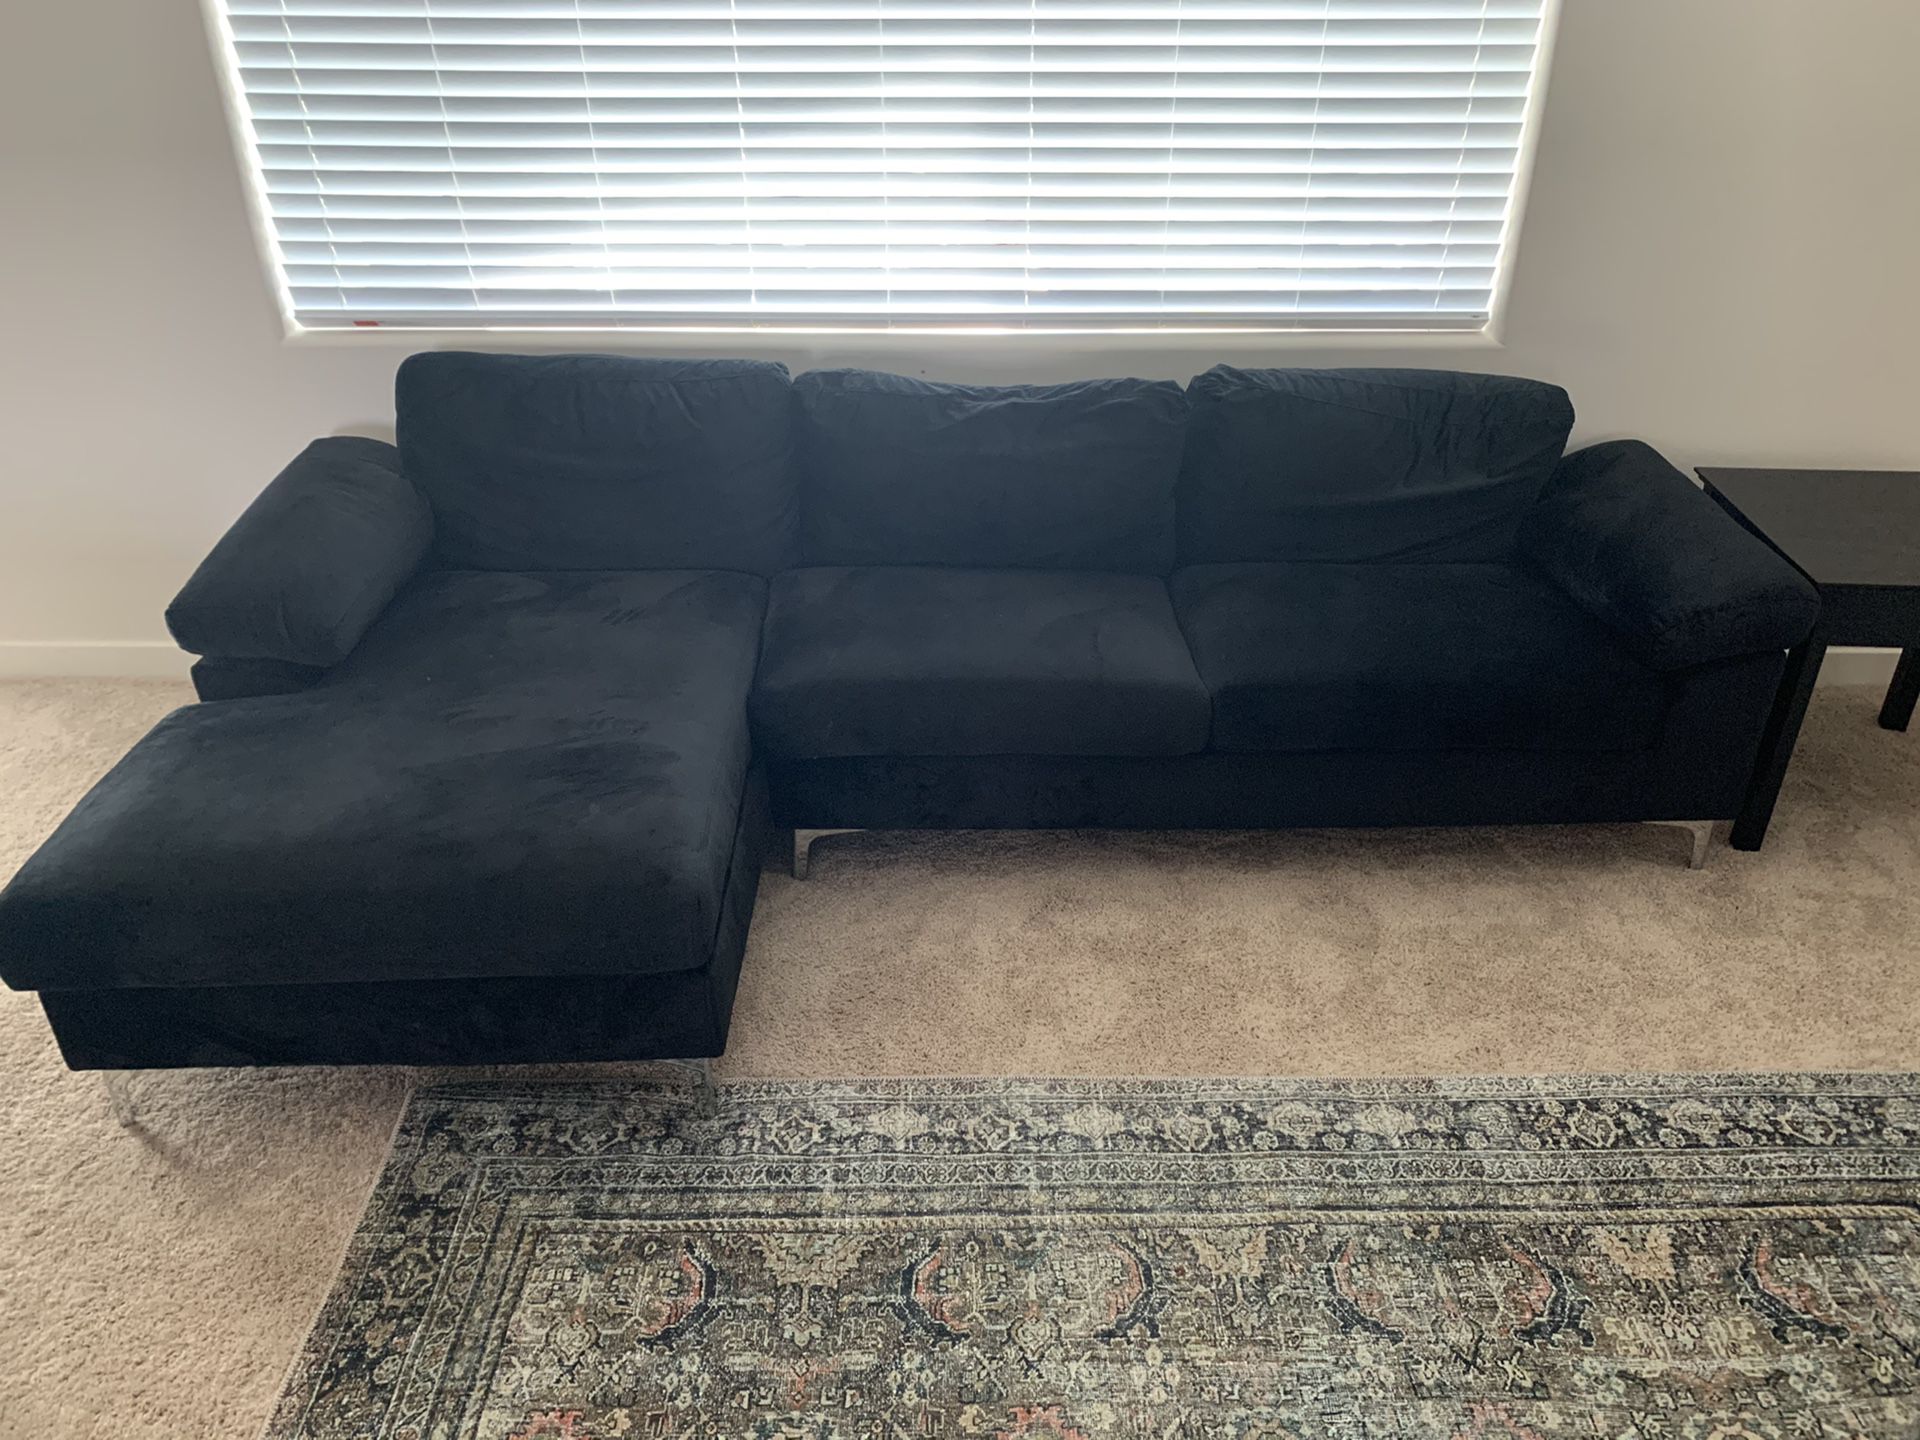 3x Like new sectional luxury couches